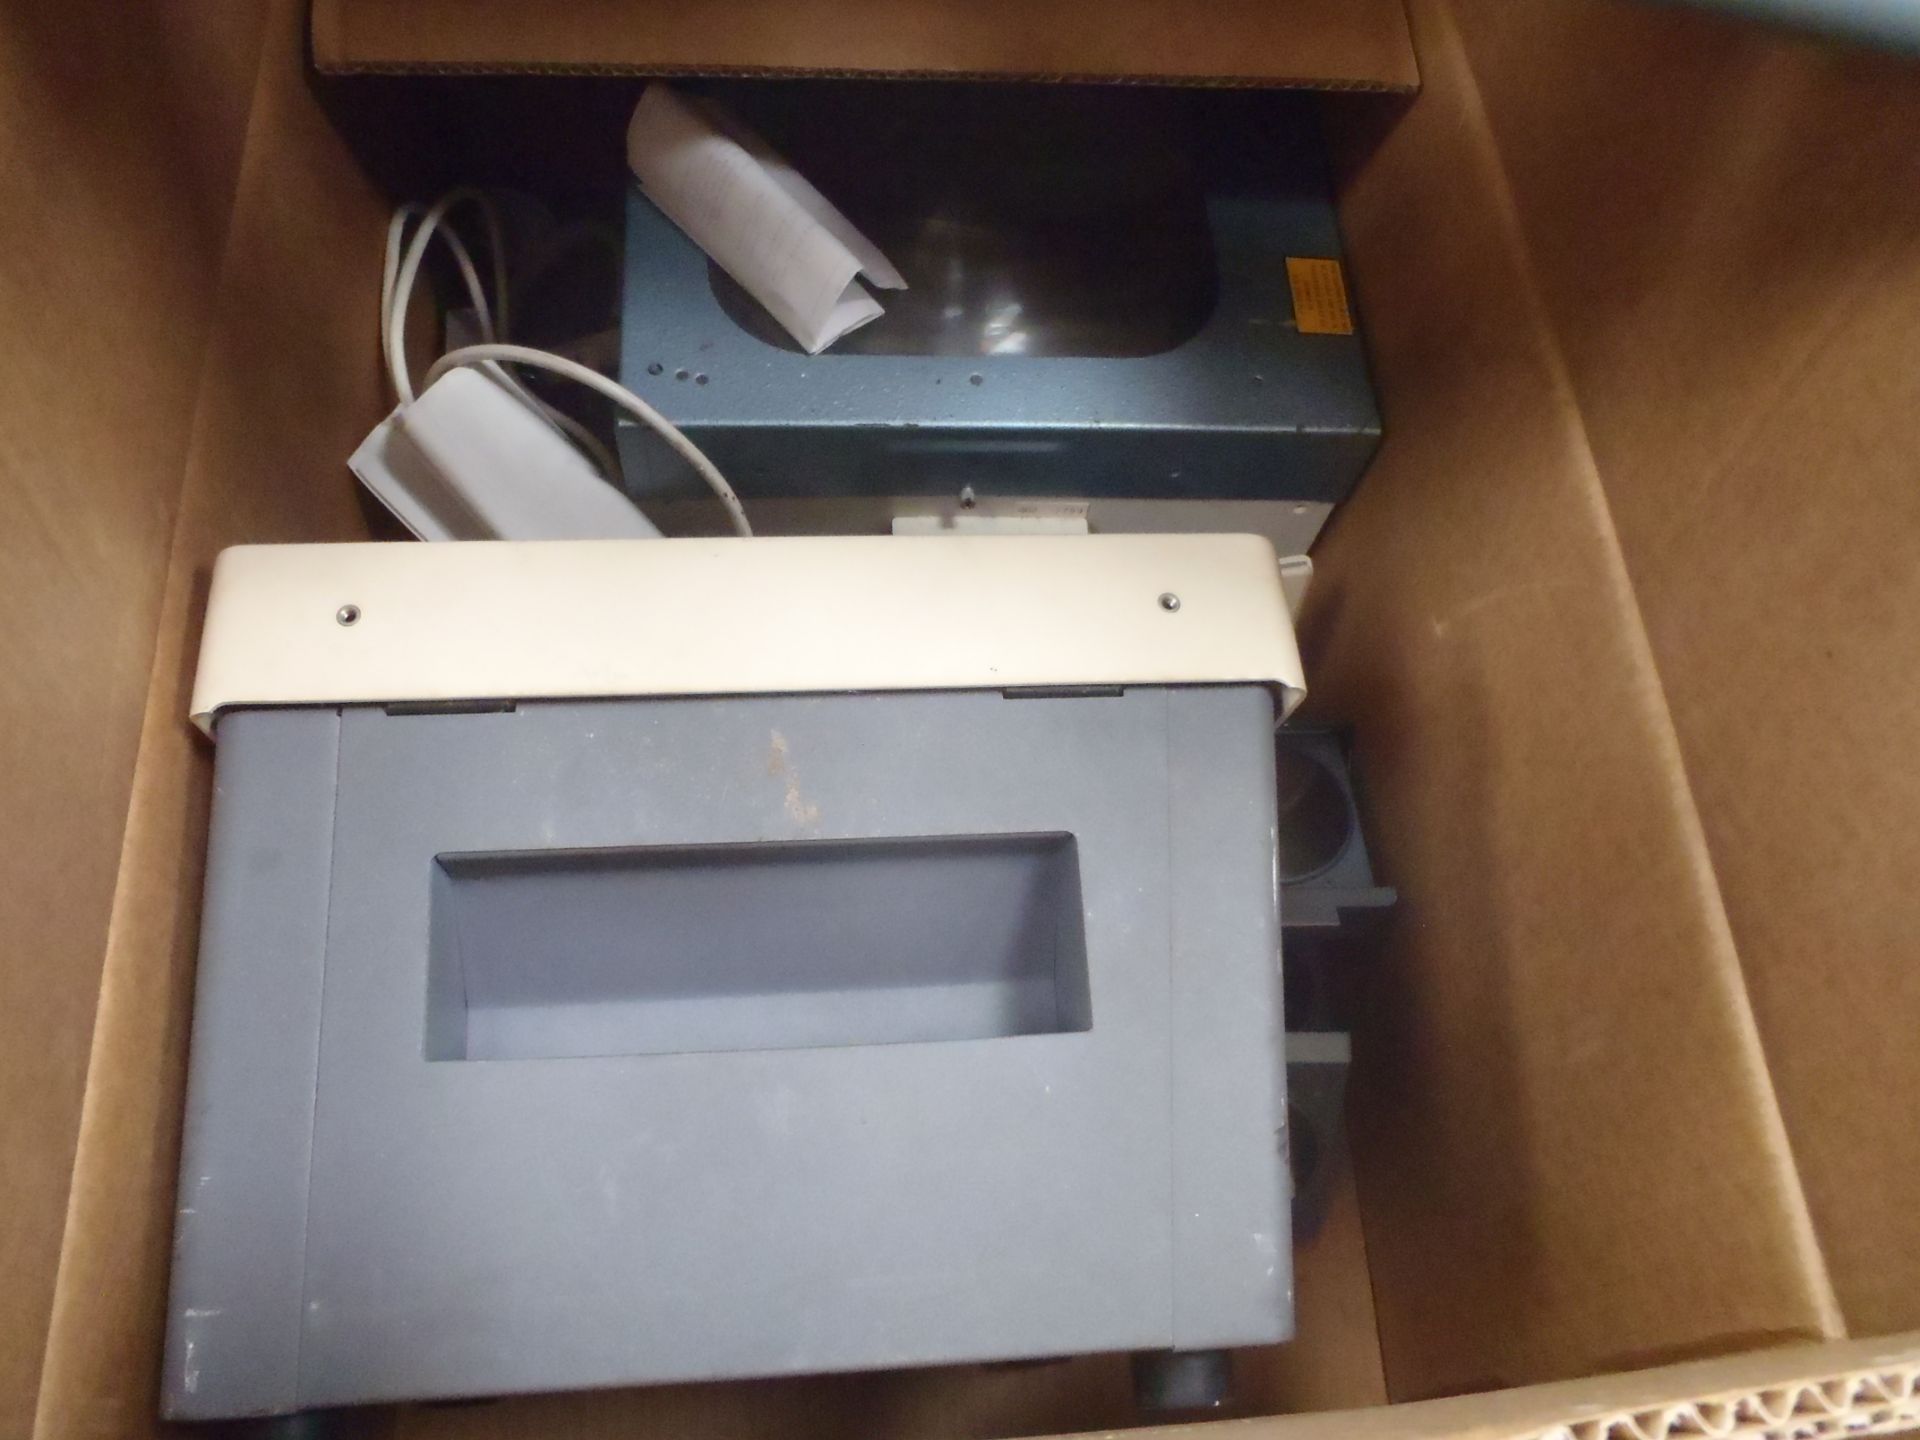 Pack of 2 - Projectors - Used - Untested - Image 2 of 2